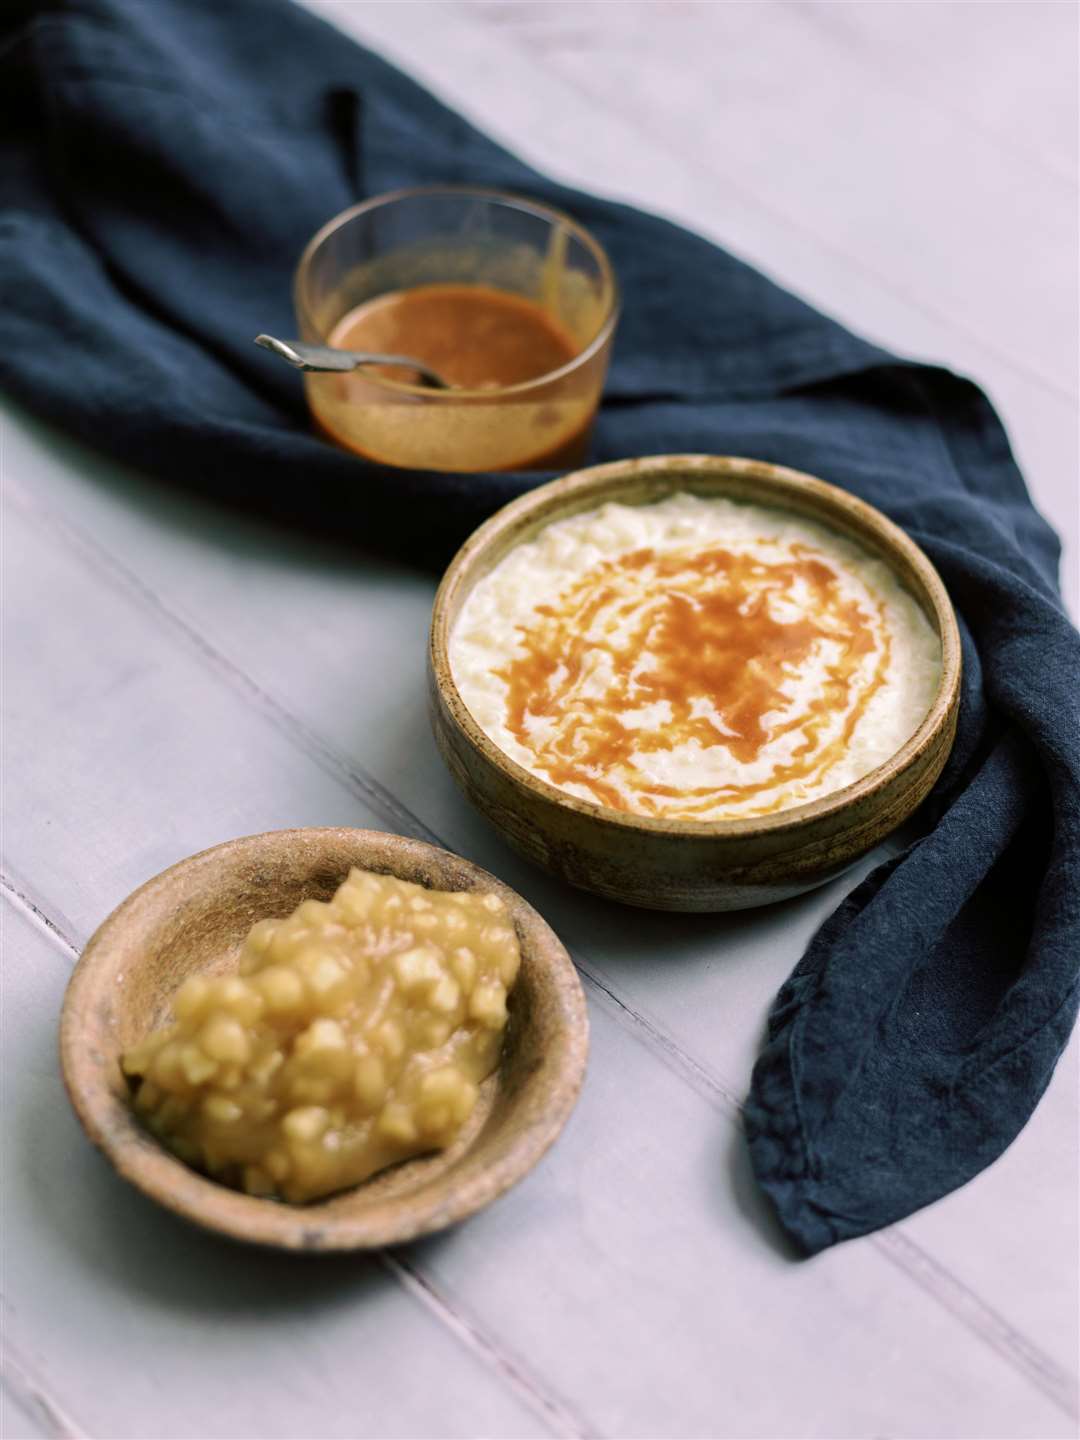 Rice pudding with apple compote and milk jam. Picture: Alexander J Collins/PA